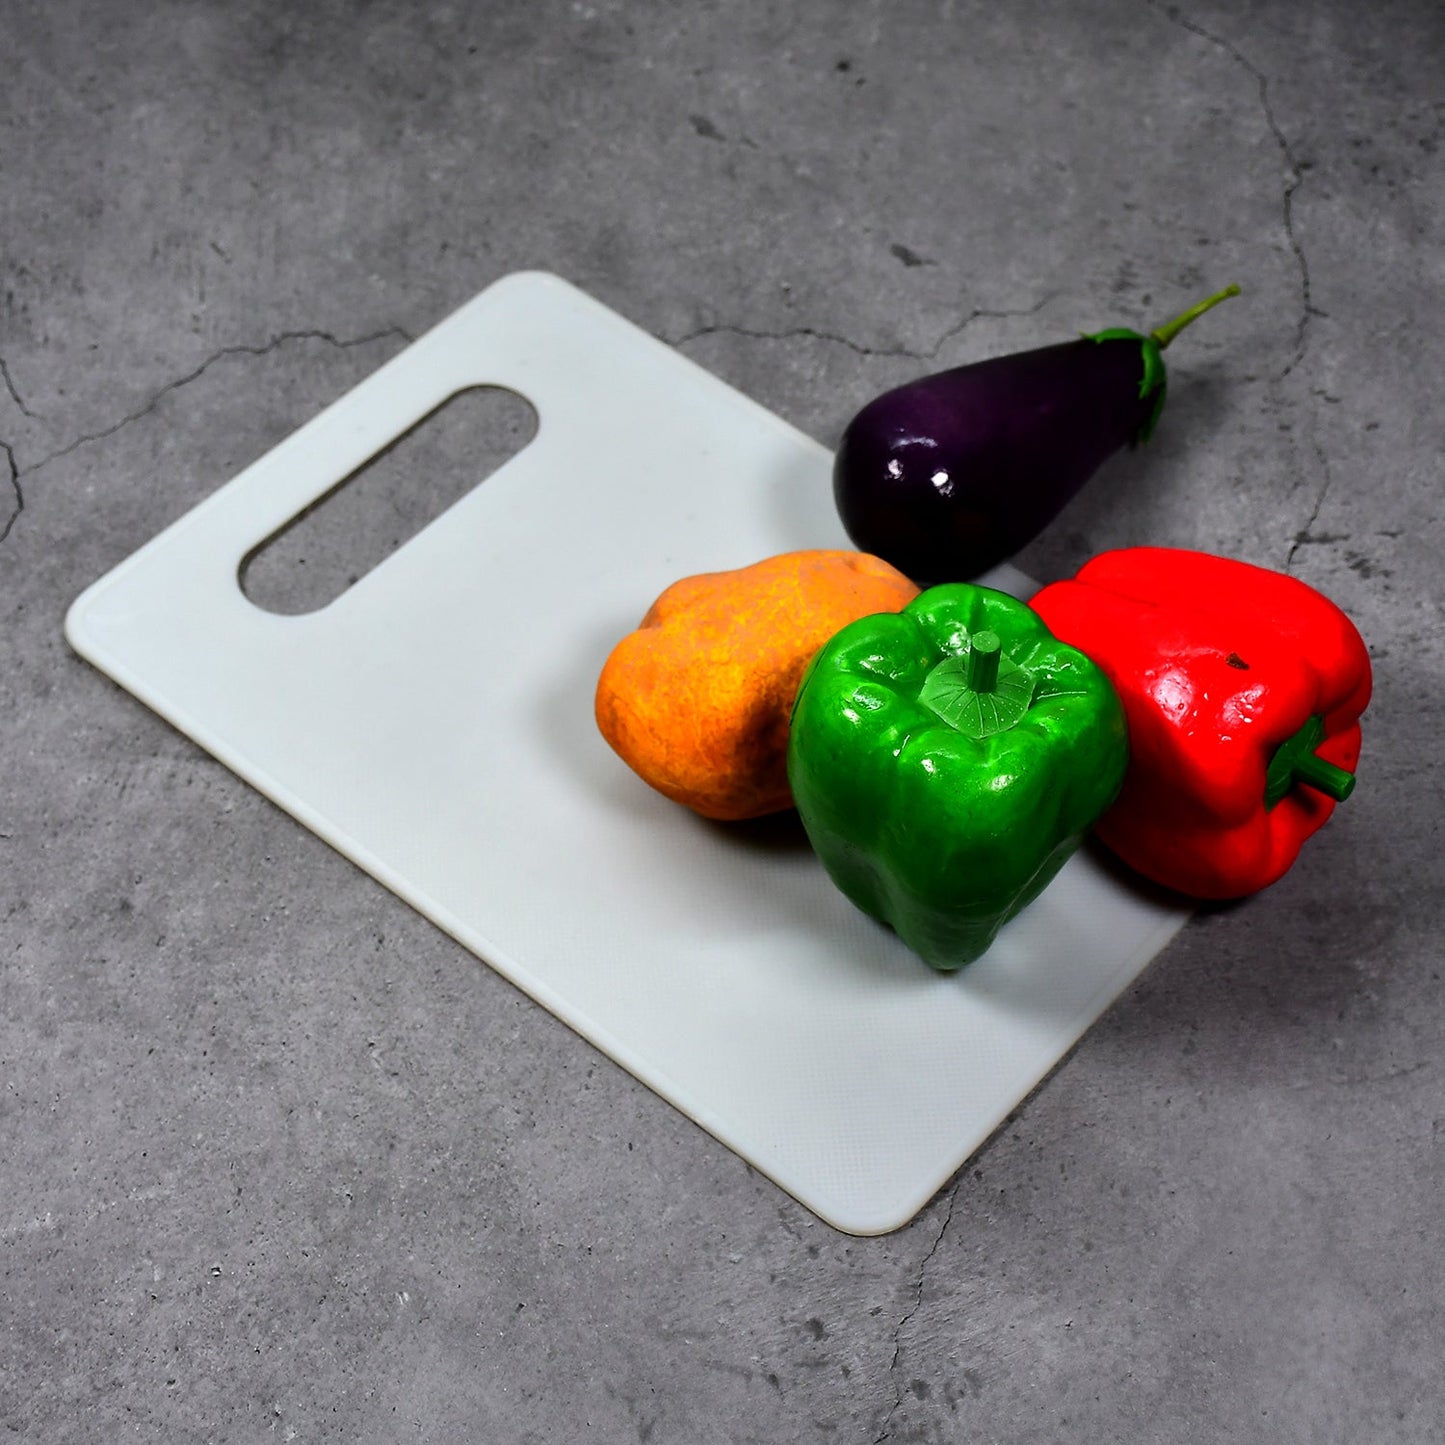 2986 White Thick/Long Lasting BPA Free Kitchen Chopping Boards Cutting Board Plastic with Handle for Regular Use. DeoDap